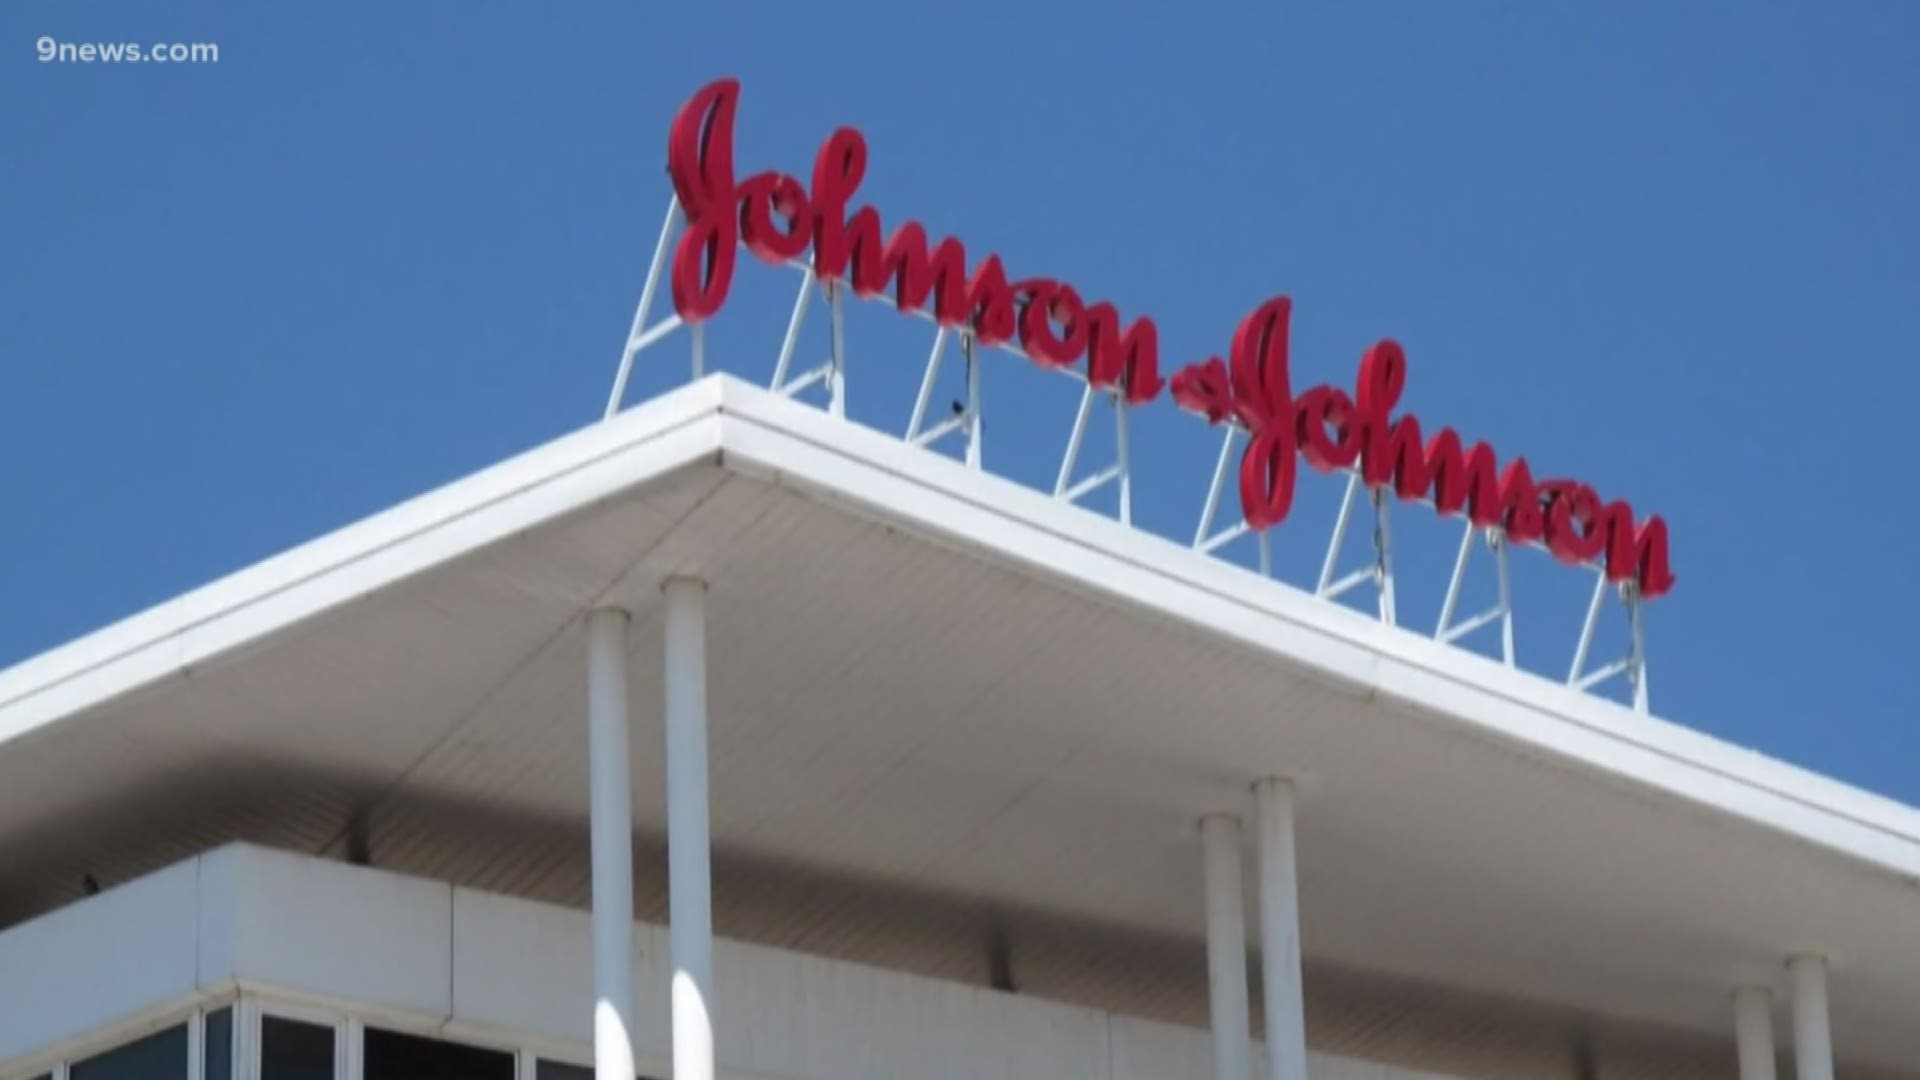 Johnson & Johnson has been ordered to pay $572 million after an opioid trial with the state of Oklahoma. It's a historic court case that could have implications across the country.